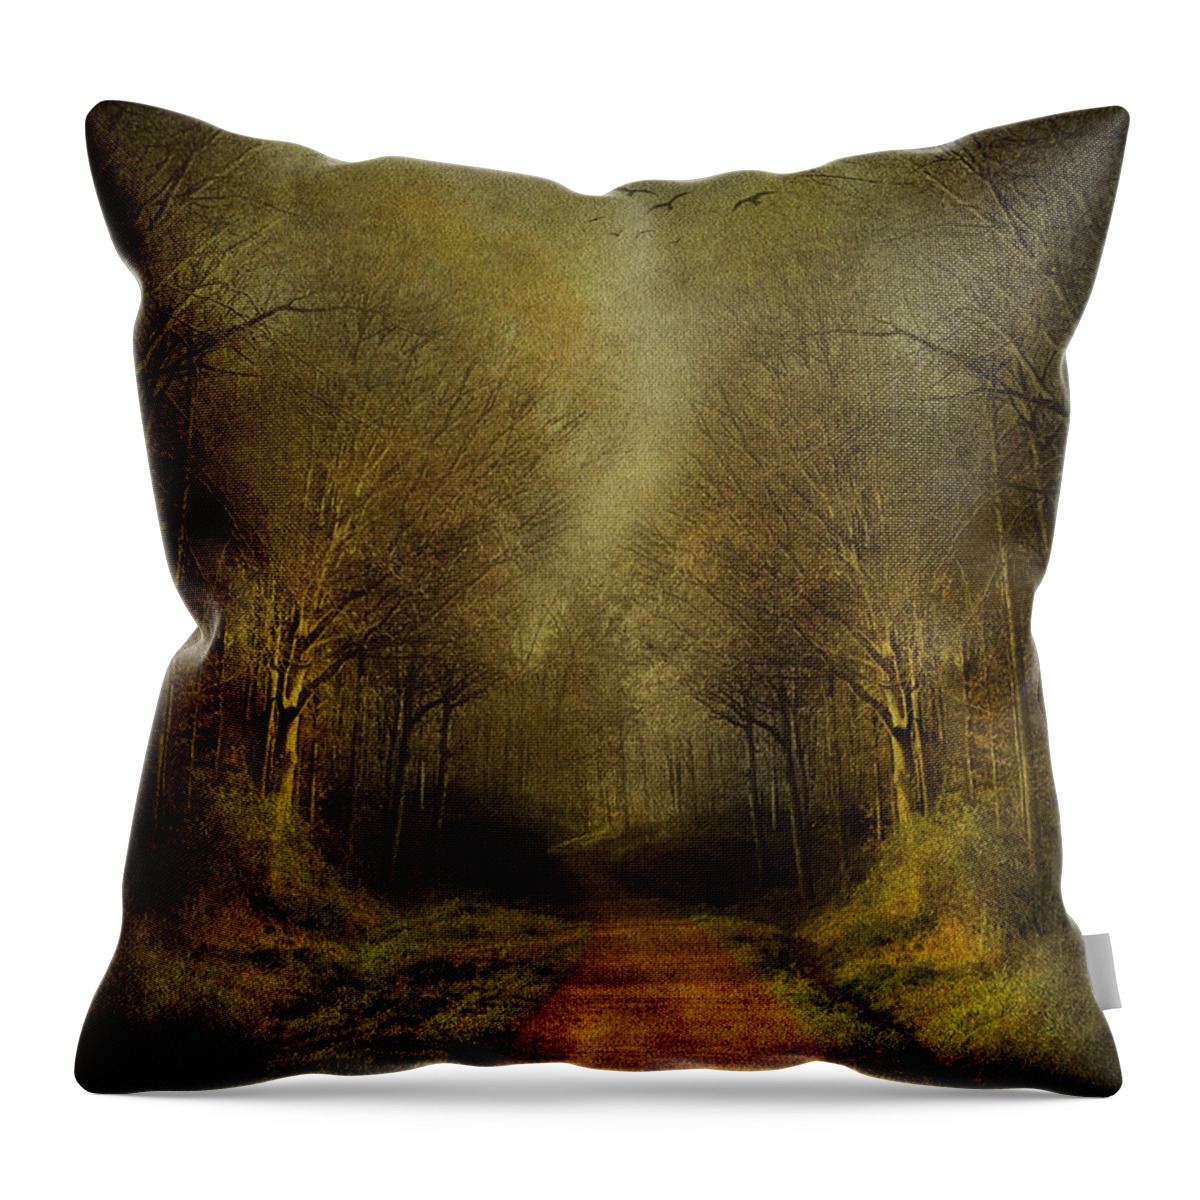 Fantasy Throw Pillow featuring the digital art Unknown Footpath by Svetlana Sewell